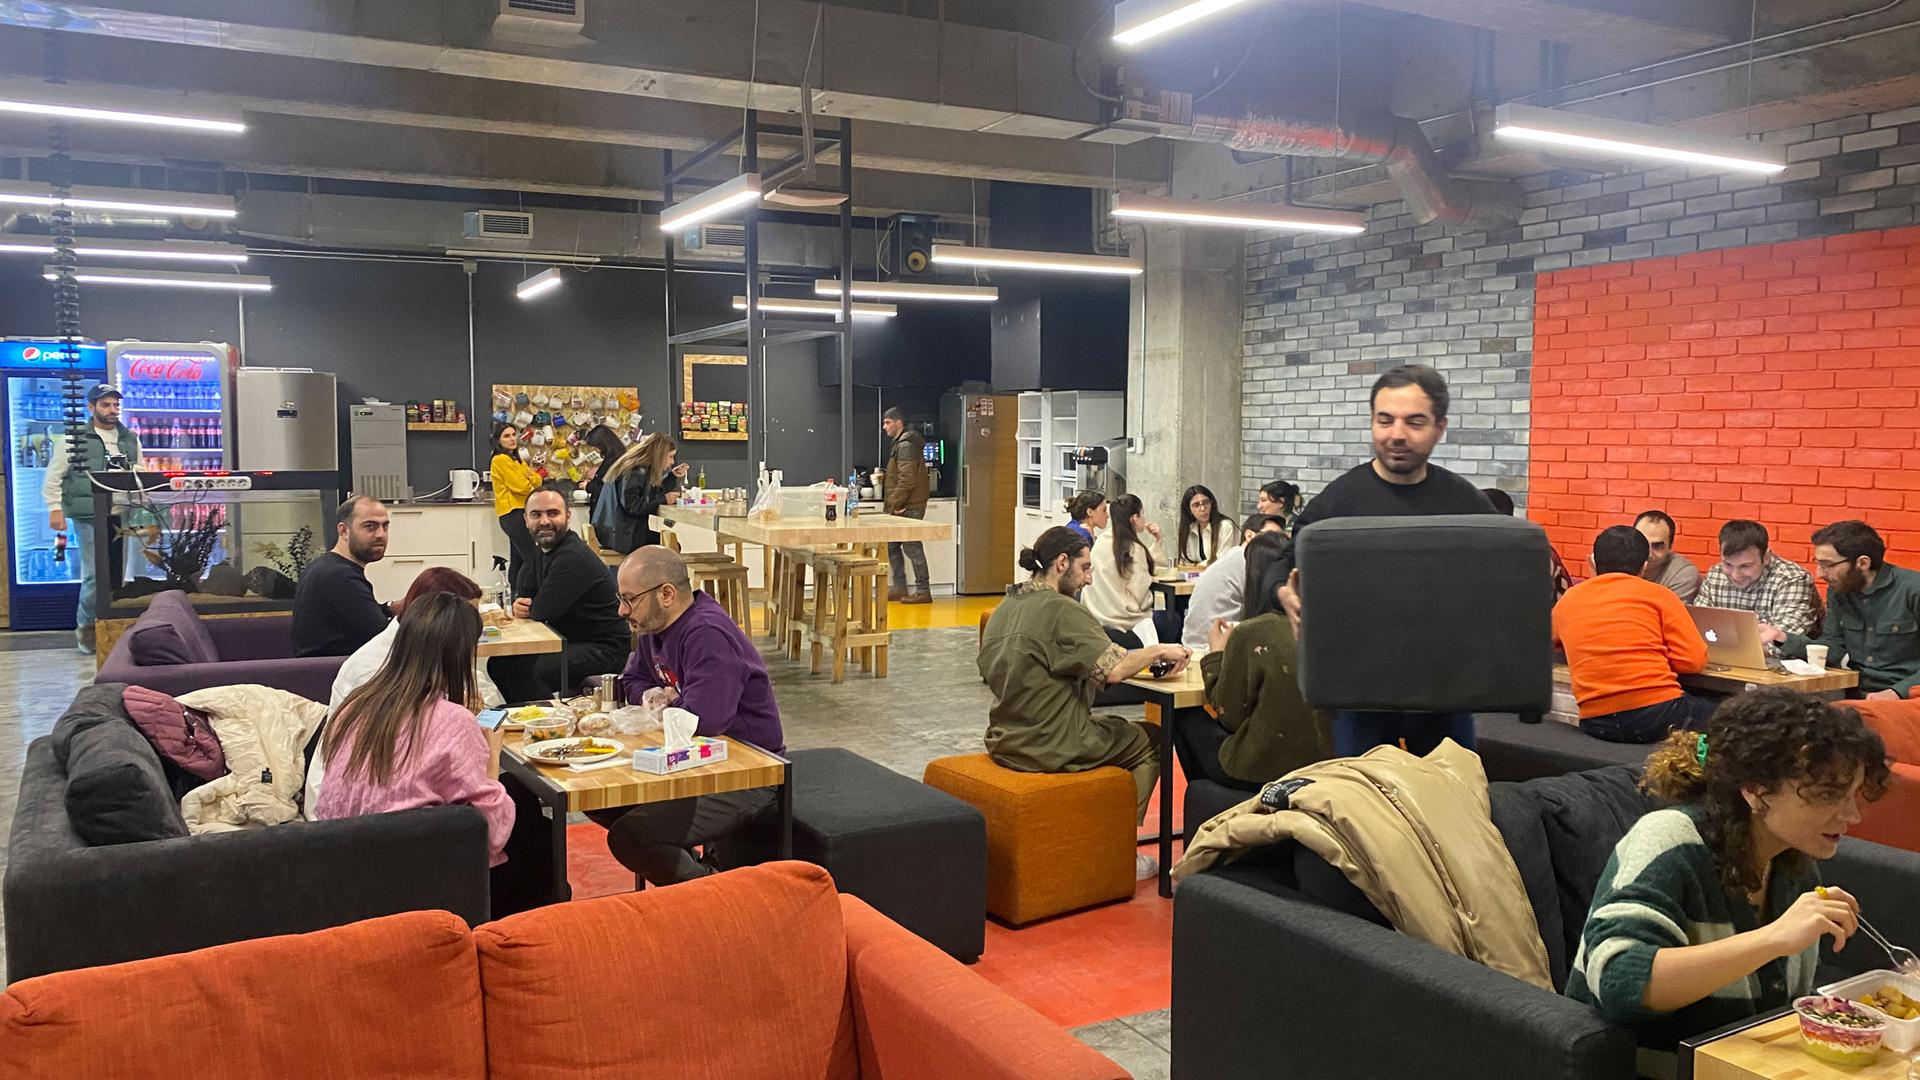 Colleagues gather at a cafeteria in the offices of Picsart, in Yerevan, Armenia.